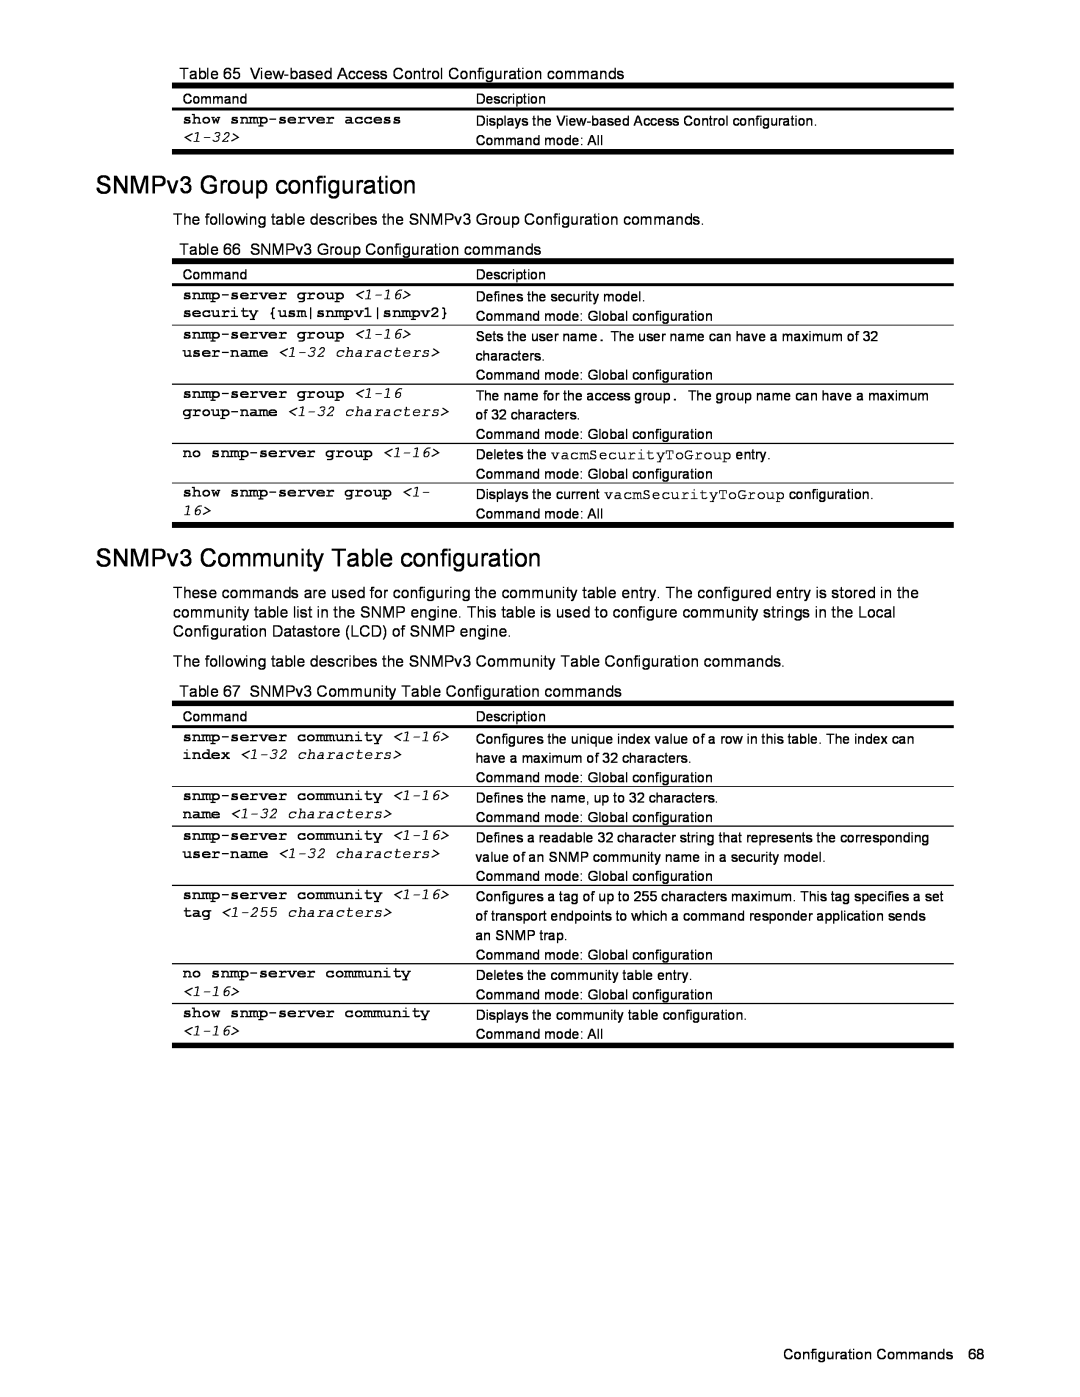 NEC N8406-022 SNMPv3 Group configuration, SNMPv3 Community Table configuration, <1-32>, user-name <1-32characters>, <1-16> 